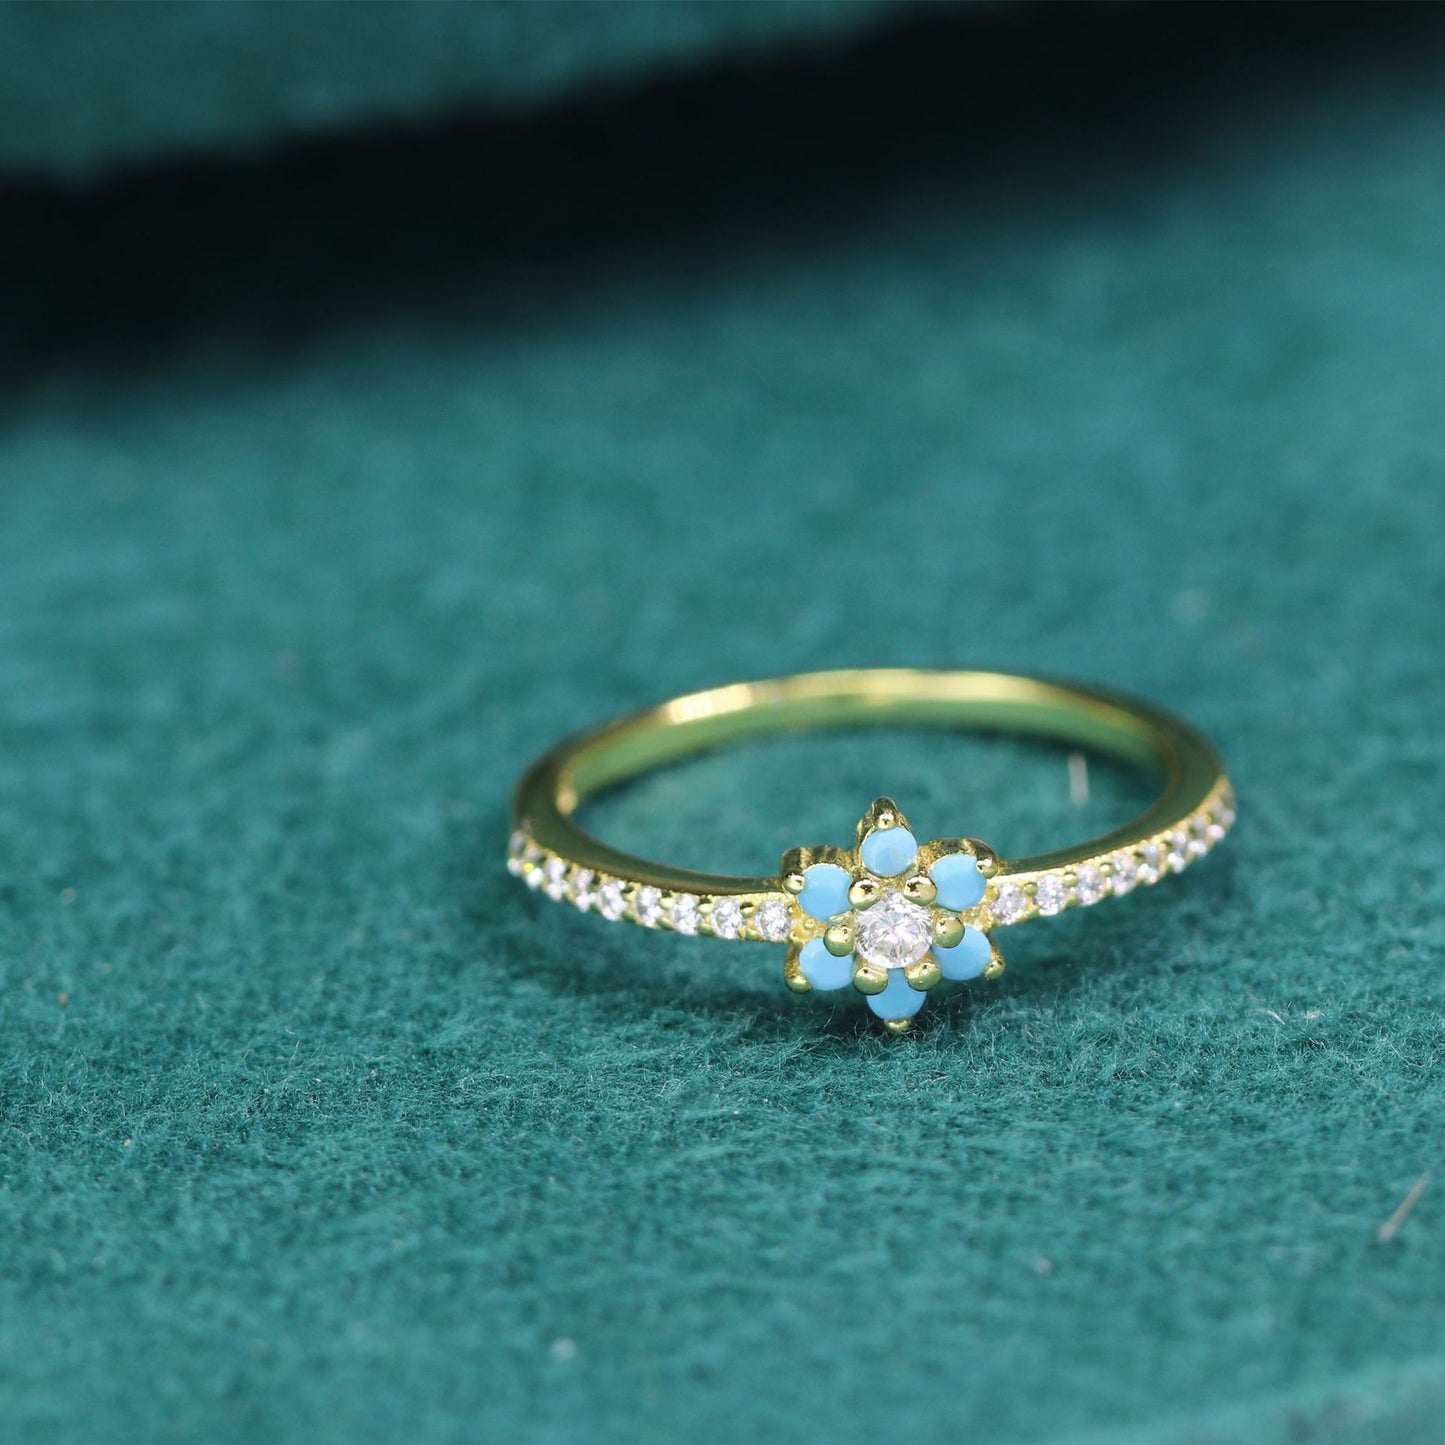 A hand holding a Maramalive™ Women's S925 Silver Simple Little Daisy Flower Ring with diamonds.